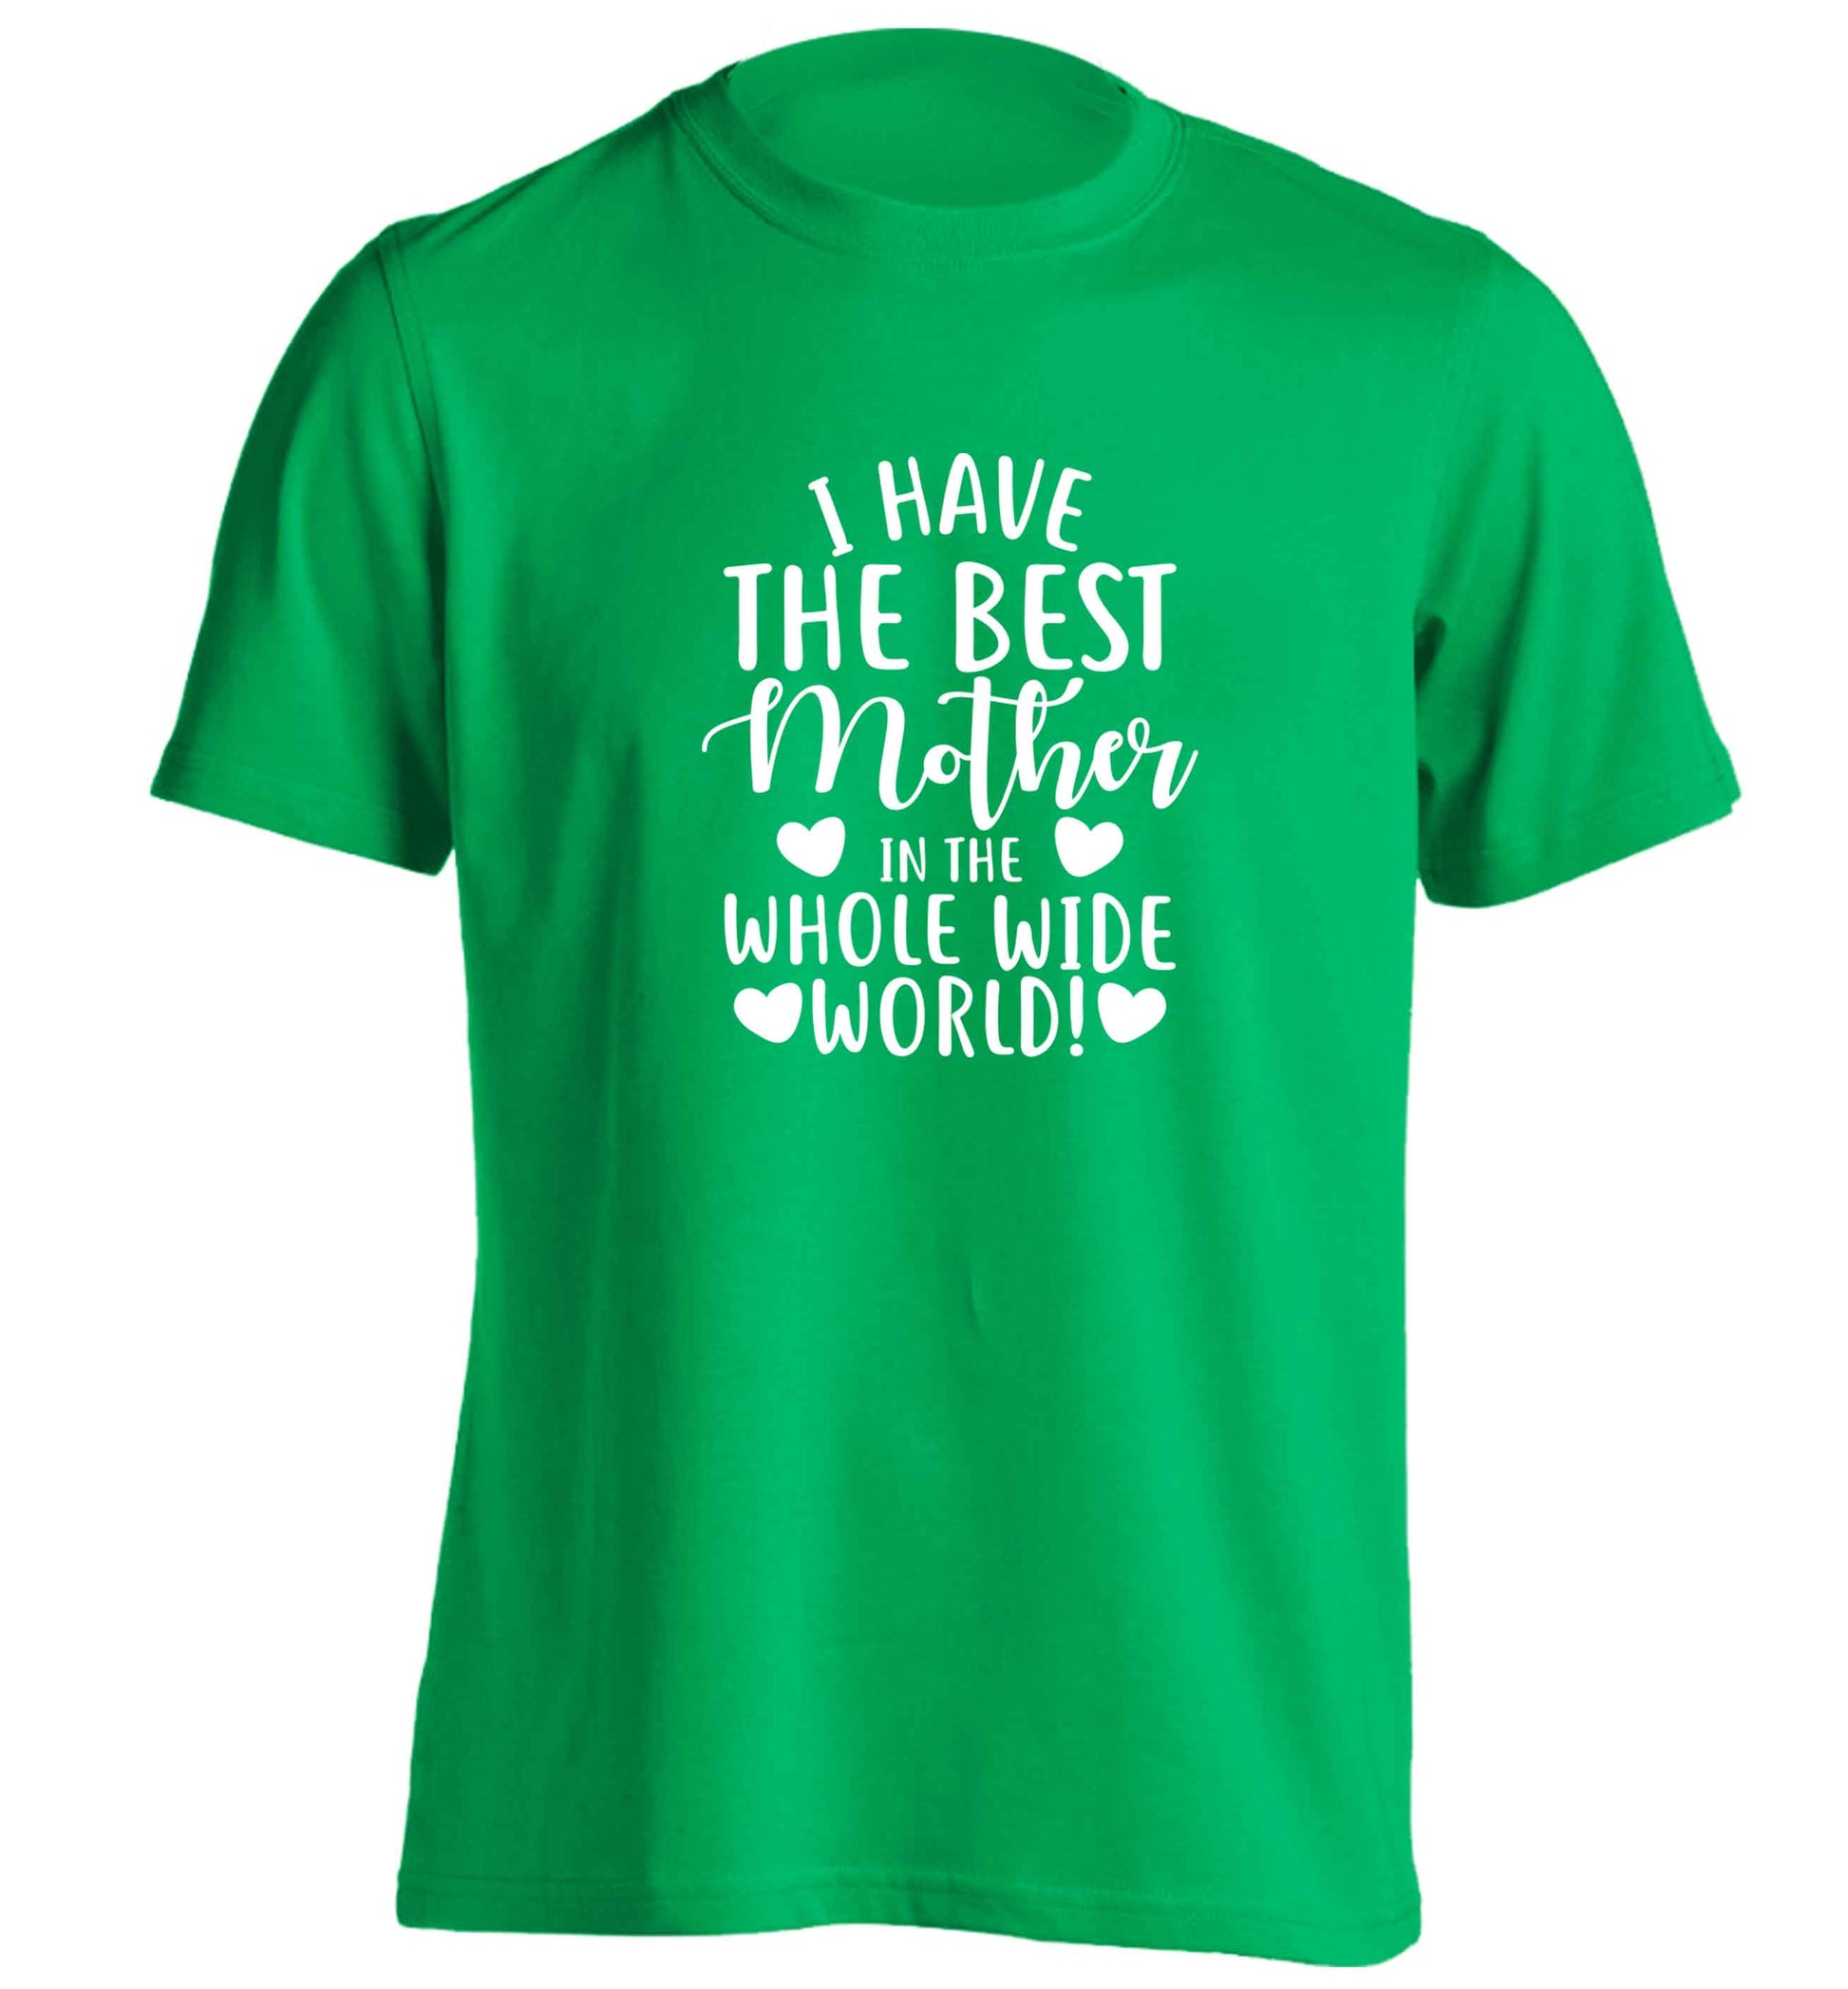 I have the best mother in the whole wide world adults unisex green Tshirt 2XL